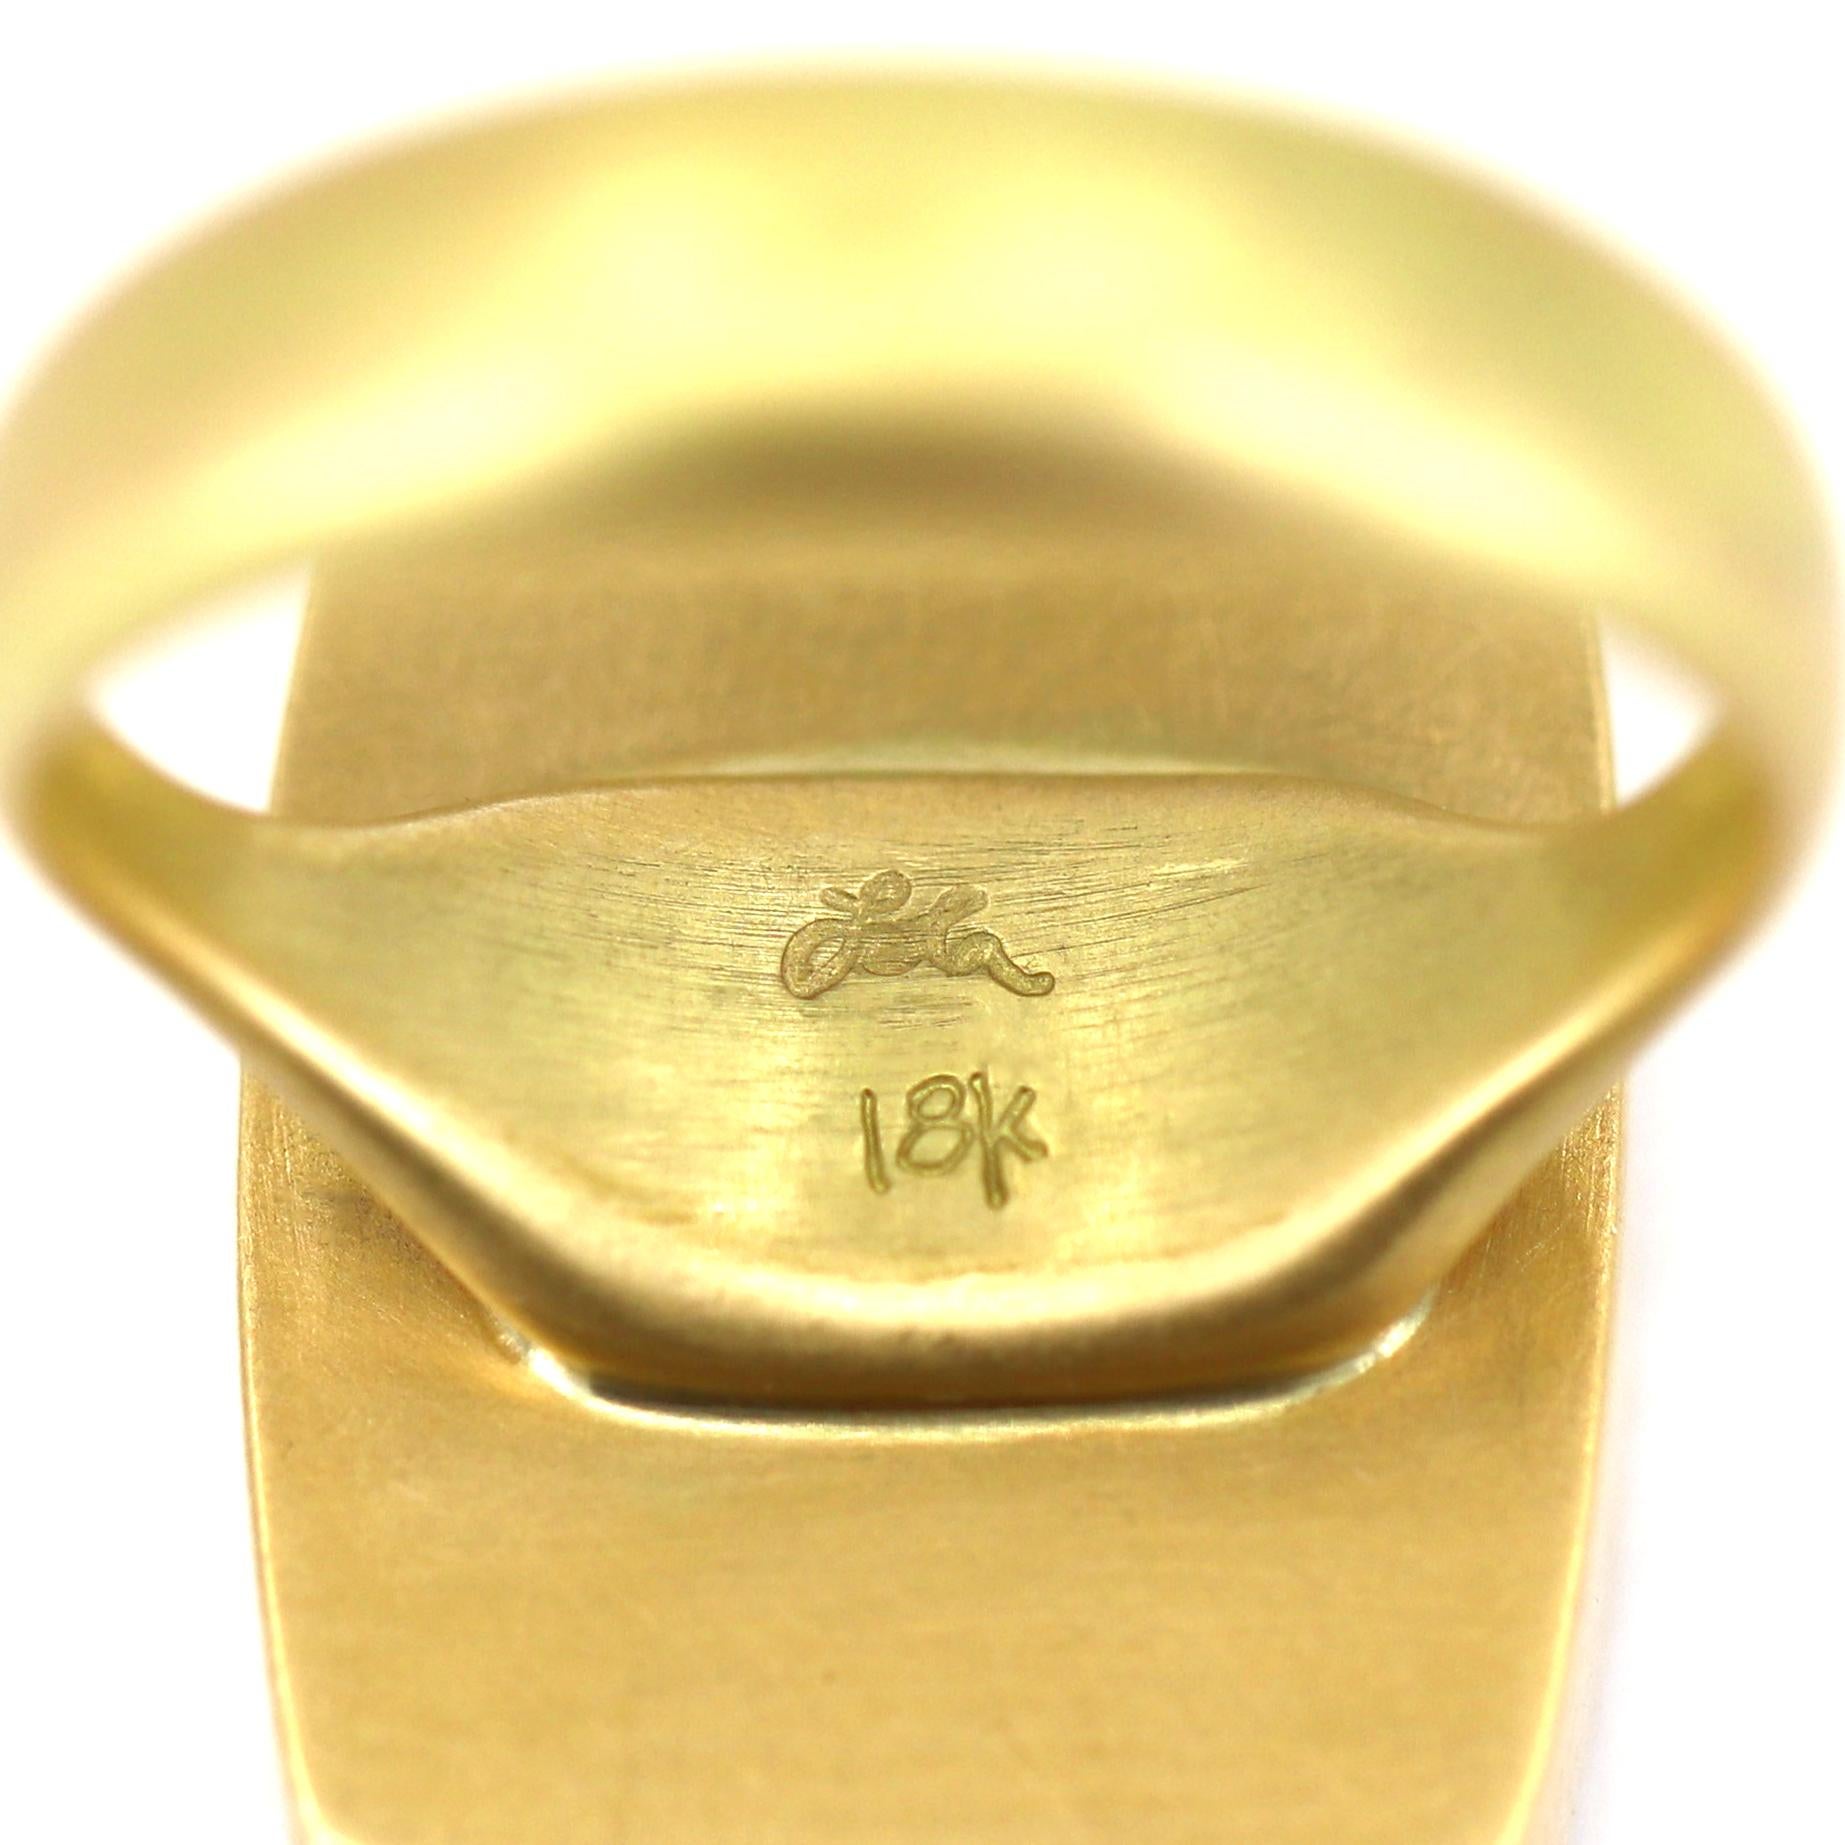 Contemporary 17.11 ct Pyrite in Rock Crystal Colorless Quartz Yellow Gold Ring, Lola Brooks